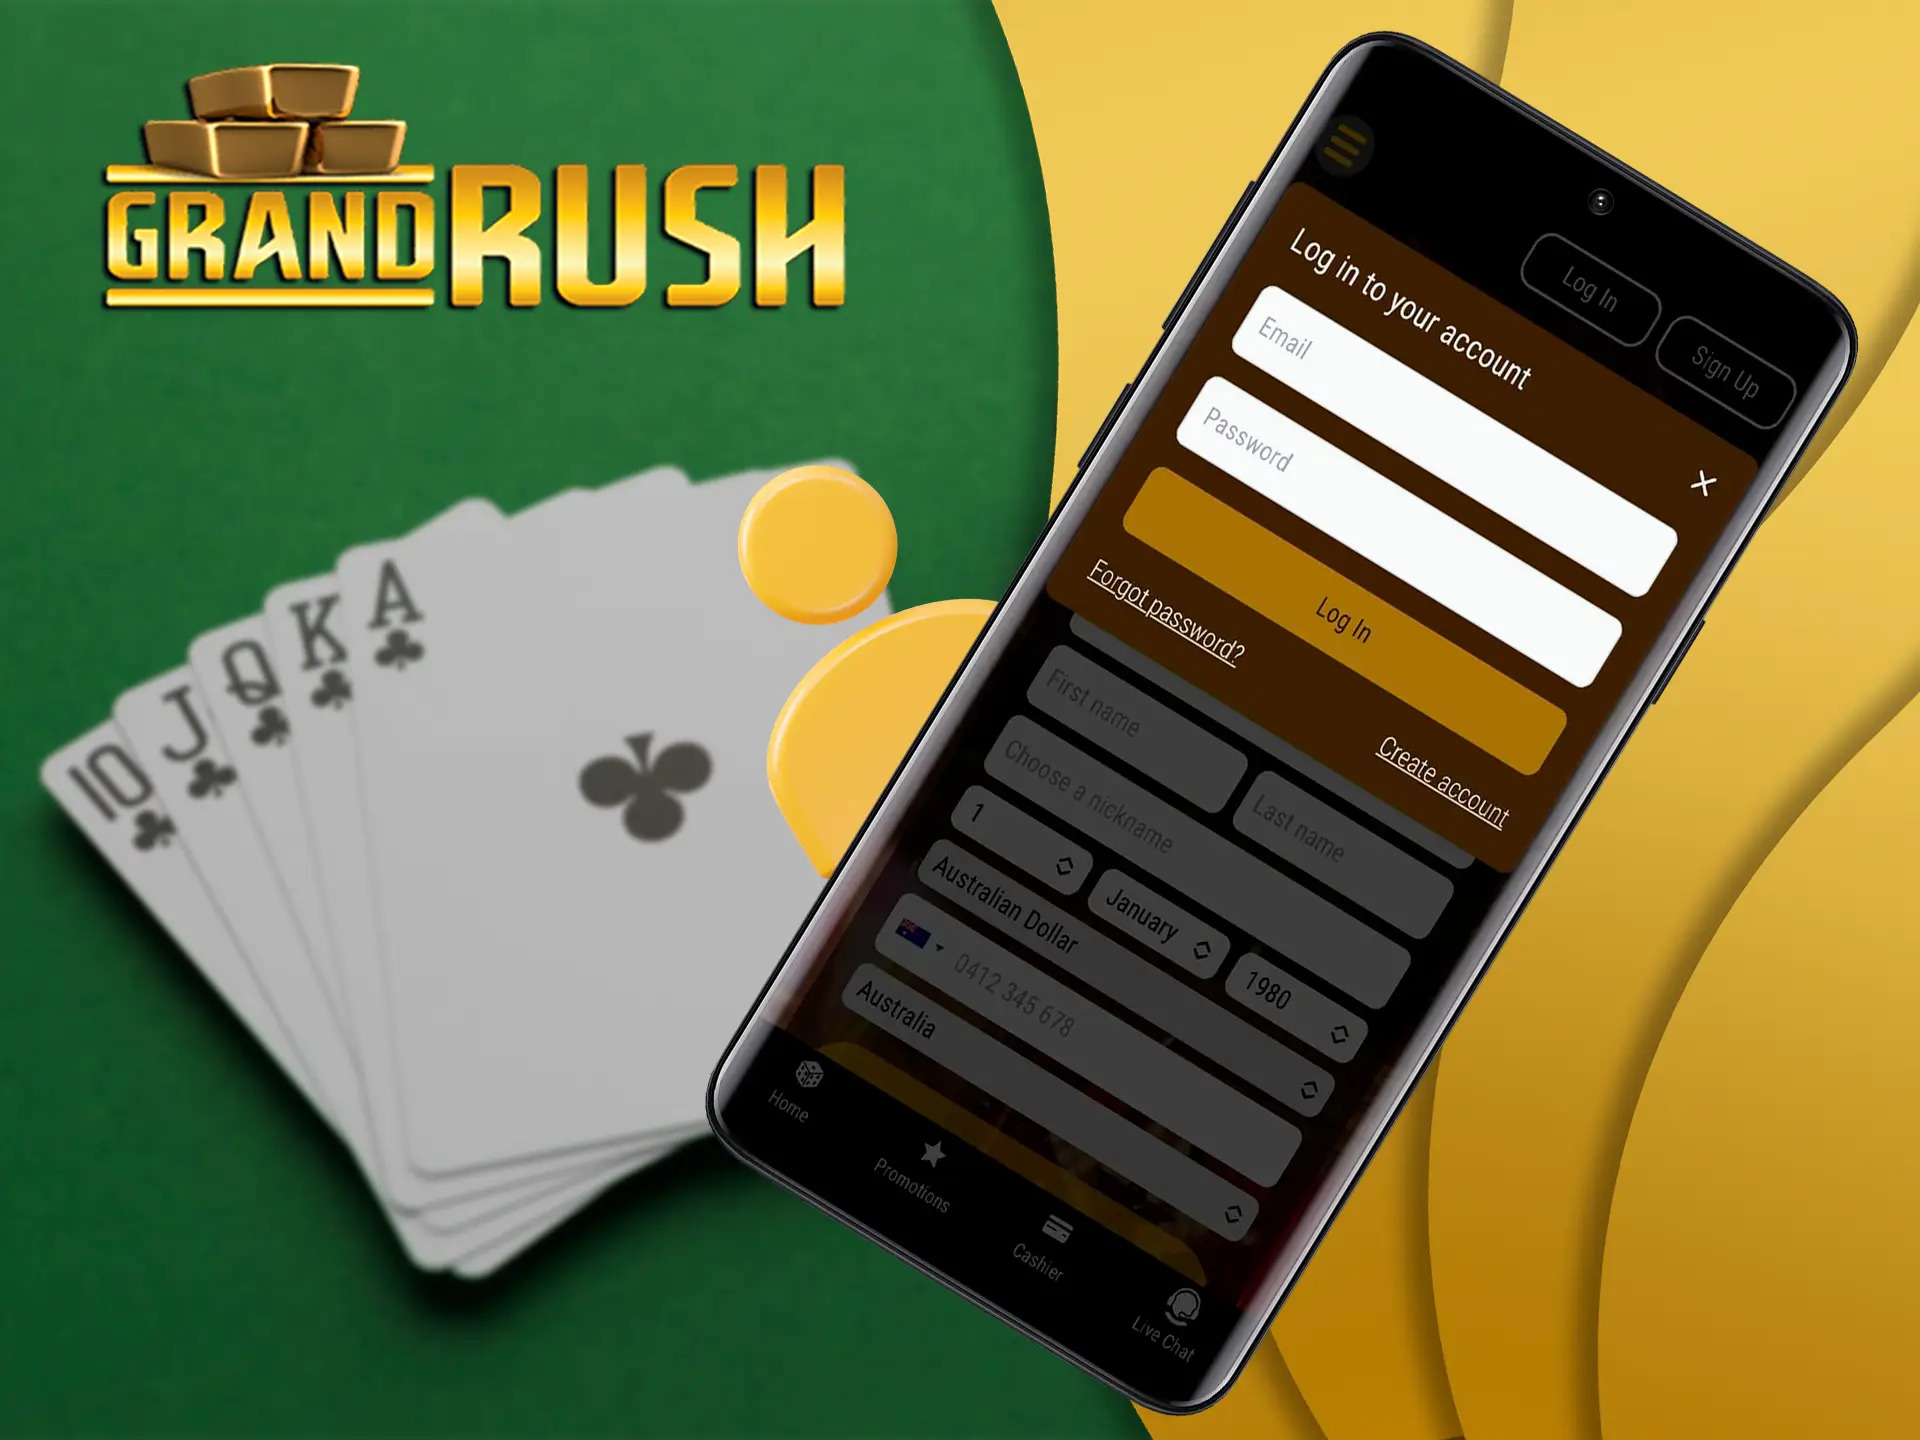 Log in to your account in the Grand Rush app to access casino games.